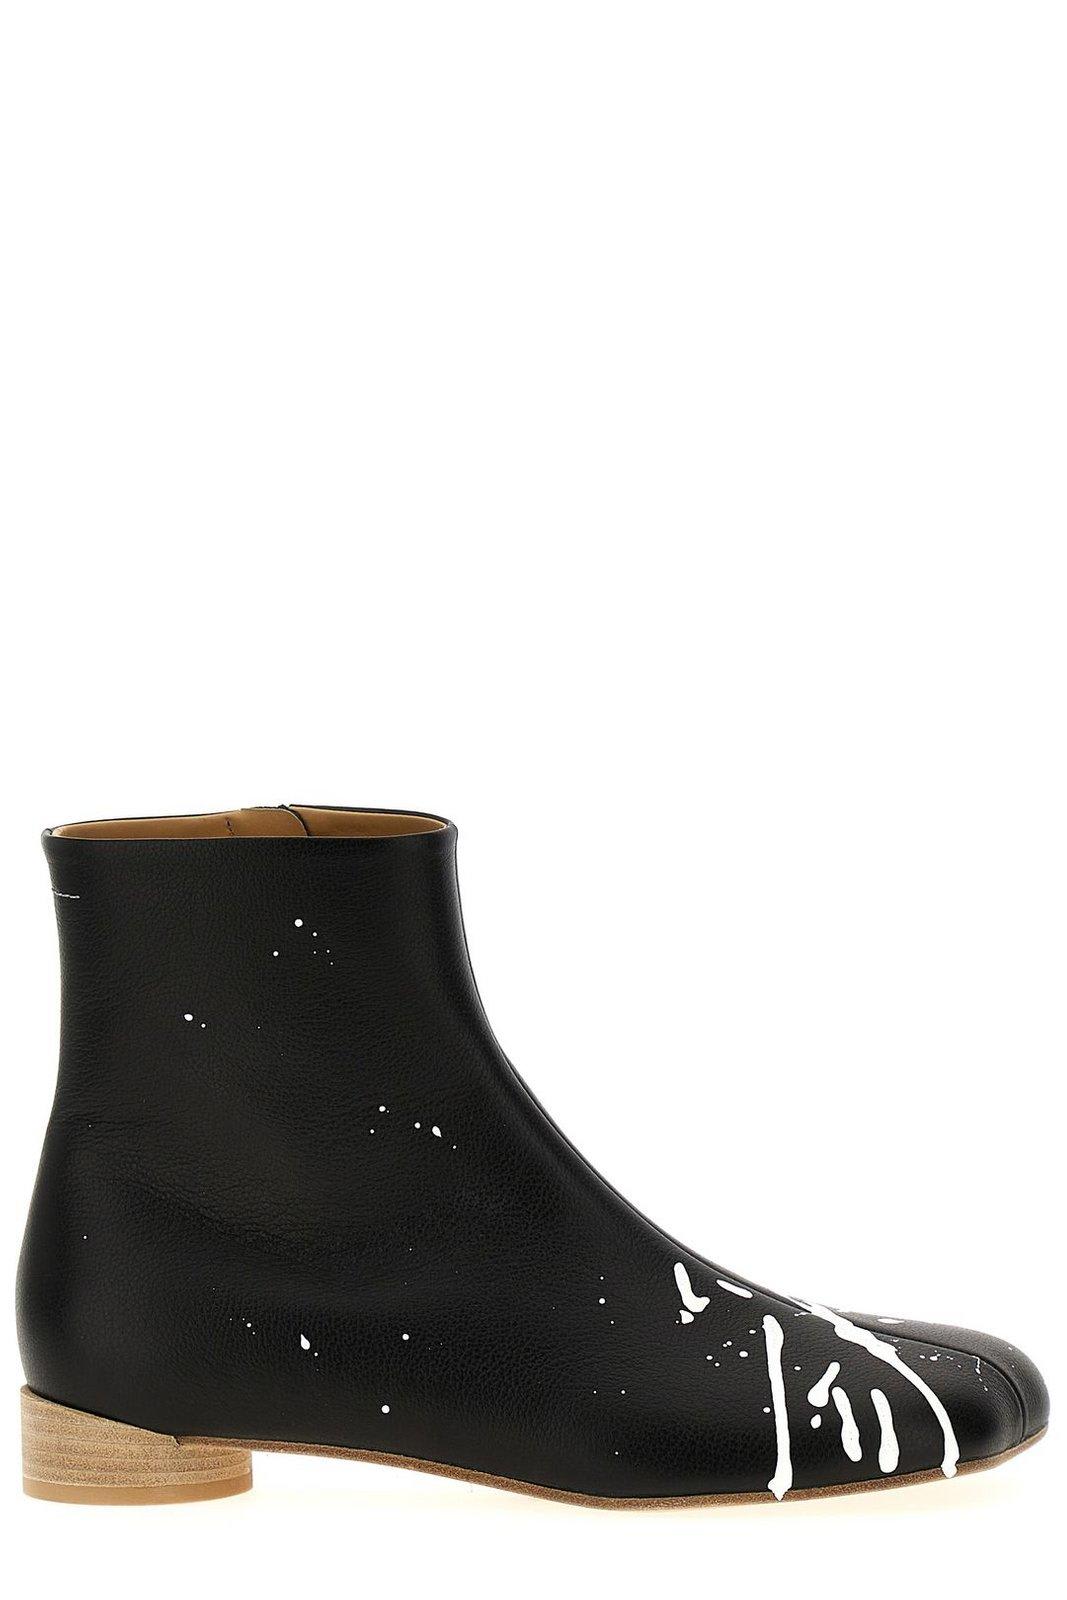 Anatomic Paint Splatter Printed Ankle Boots